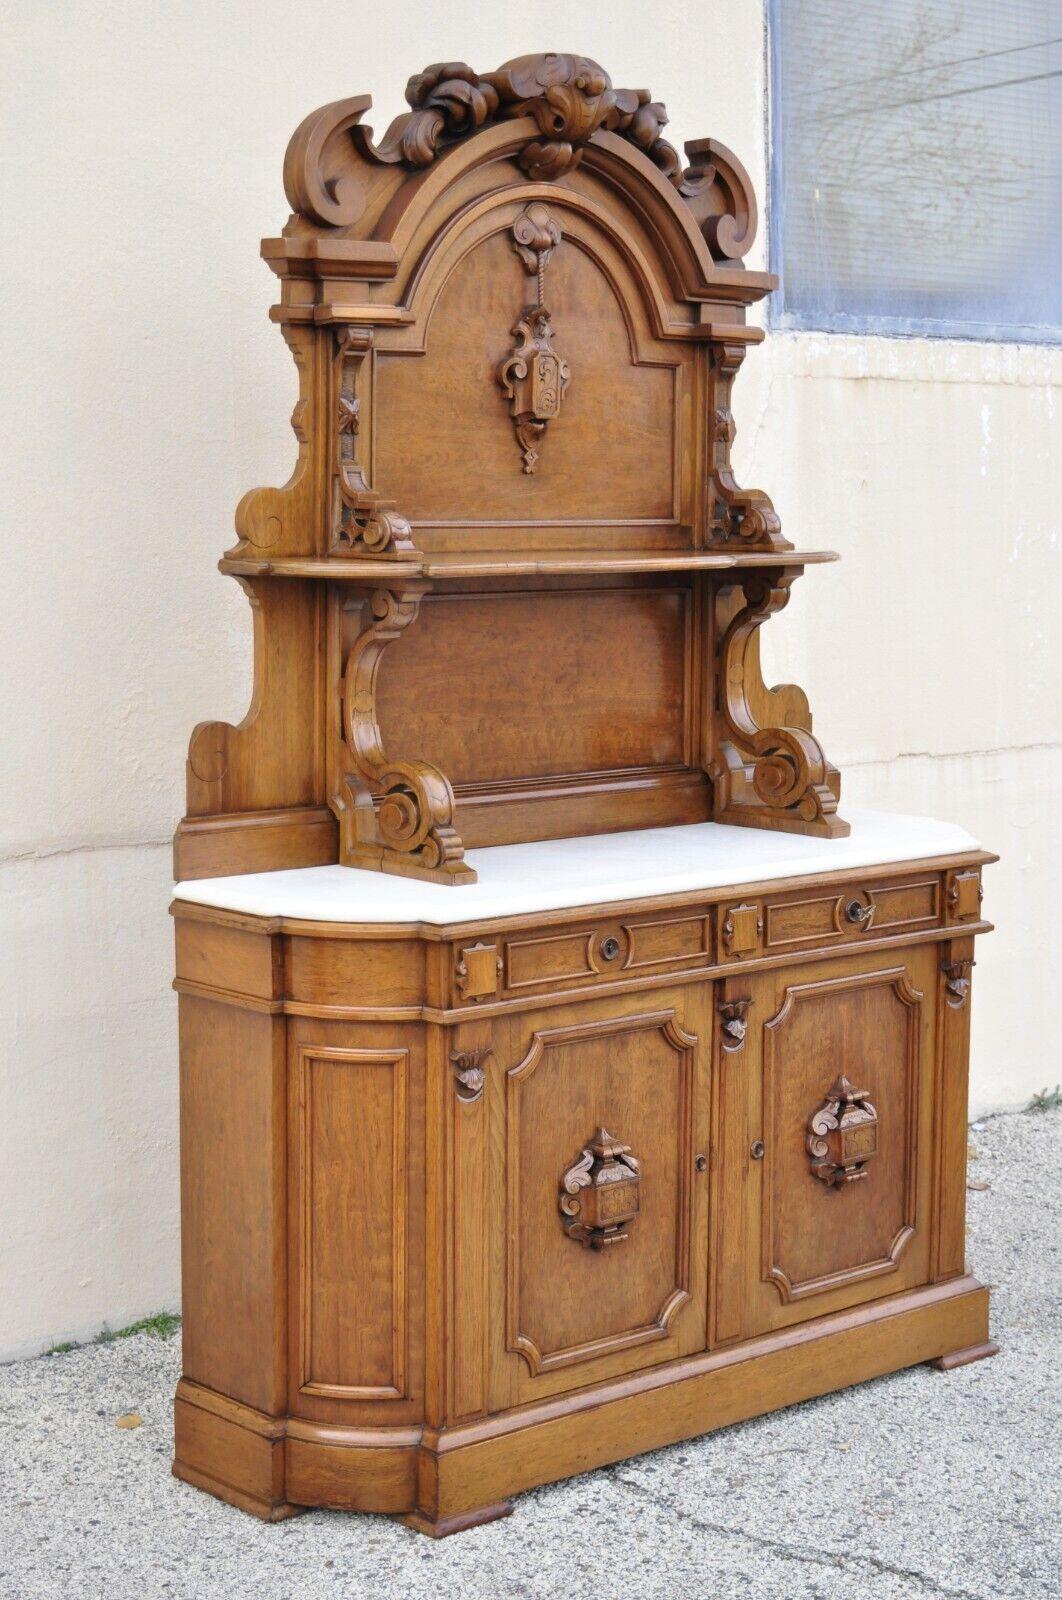 Antique Victorian Carved Walnut Marble Top Custom Sideboard Buffet Cabinet with Backsplash. Item features a tall impressive backsplash with upper shelf and ornate carvings, white marble shaped top, solid wood construction, beautiful wood grain, 3